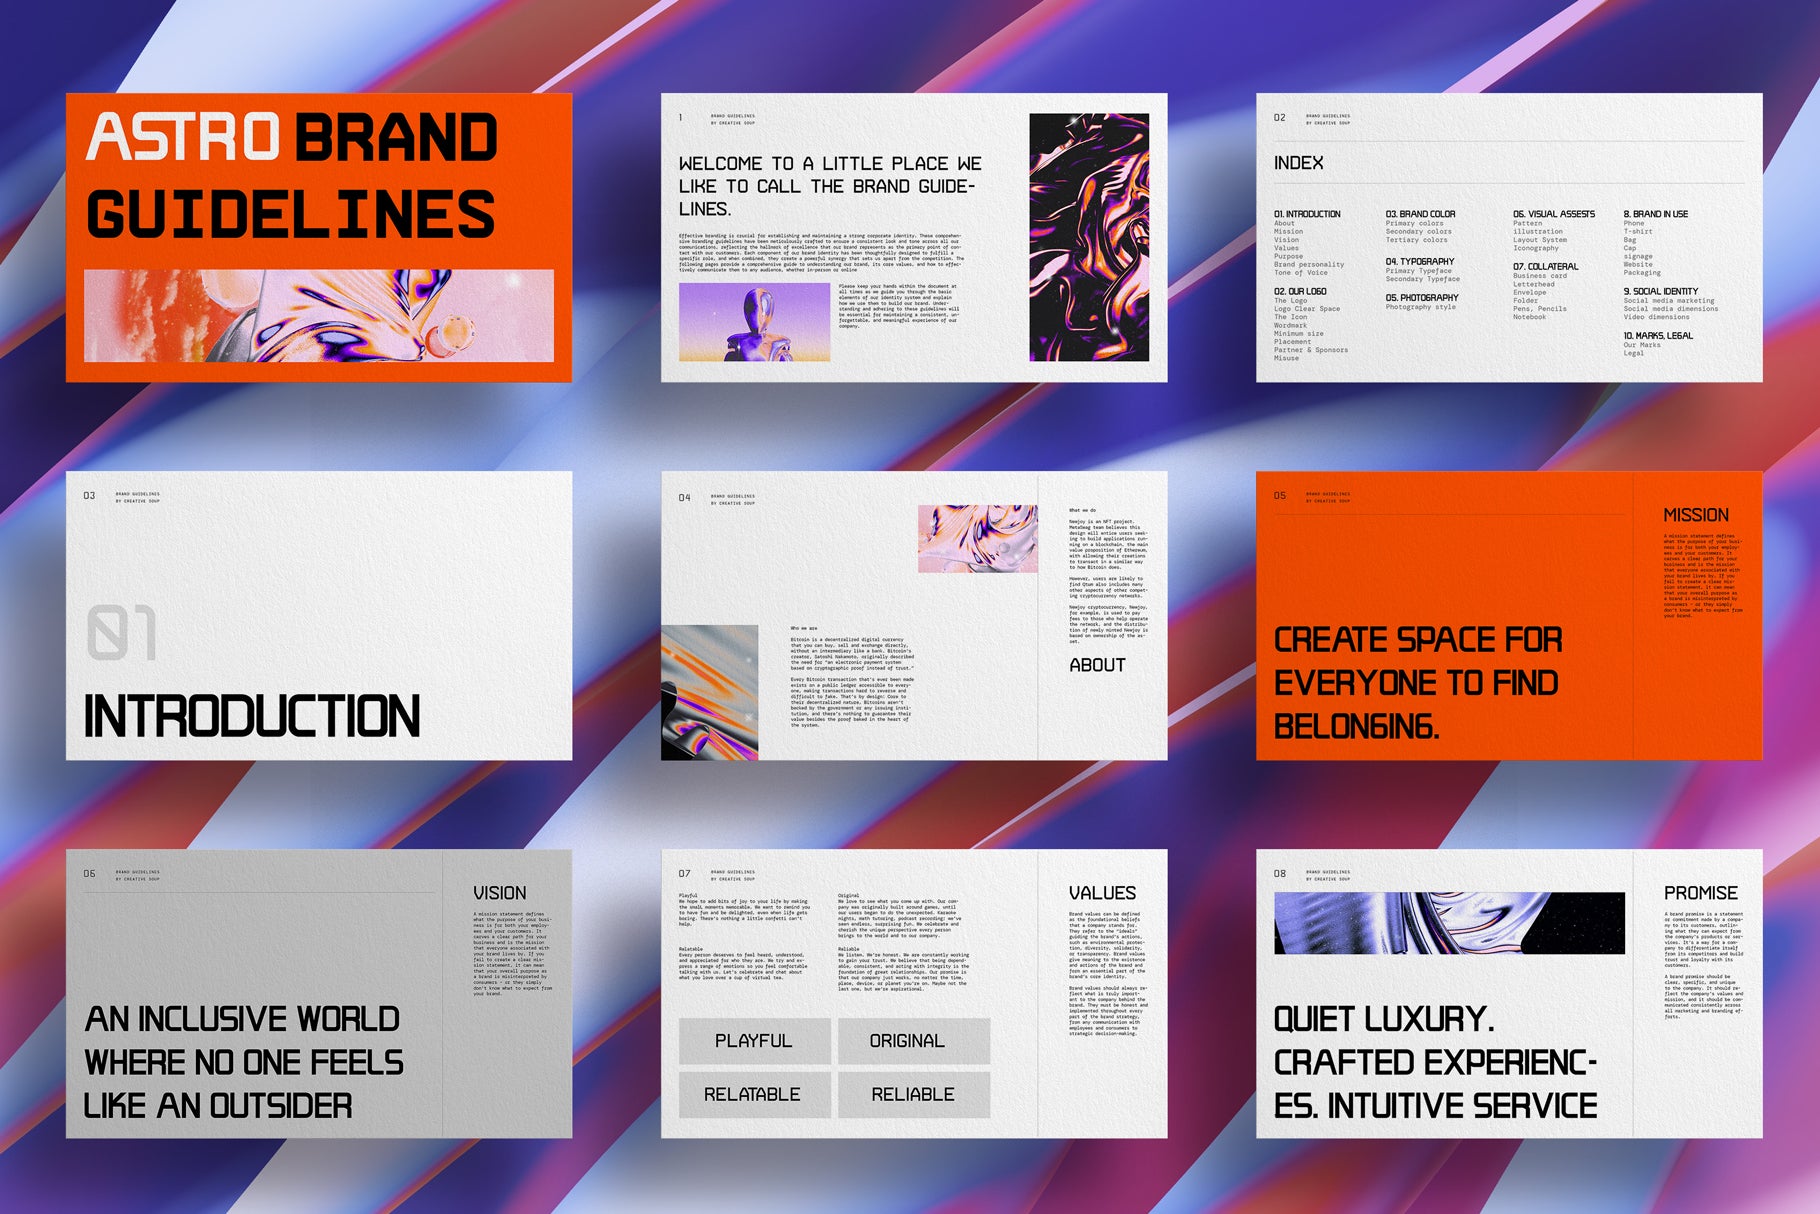 Brand Guidelines 